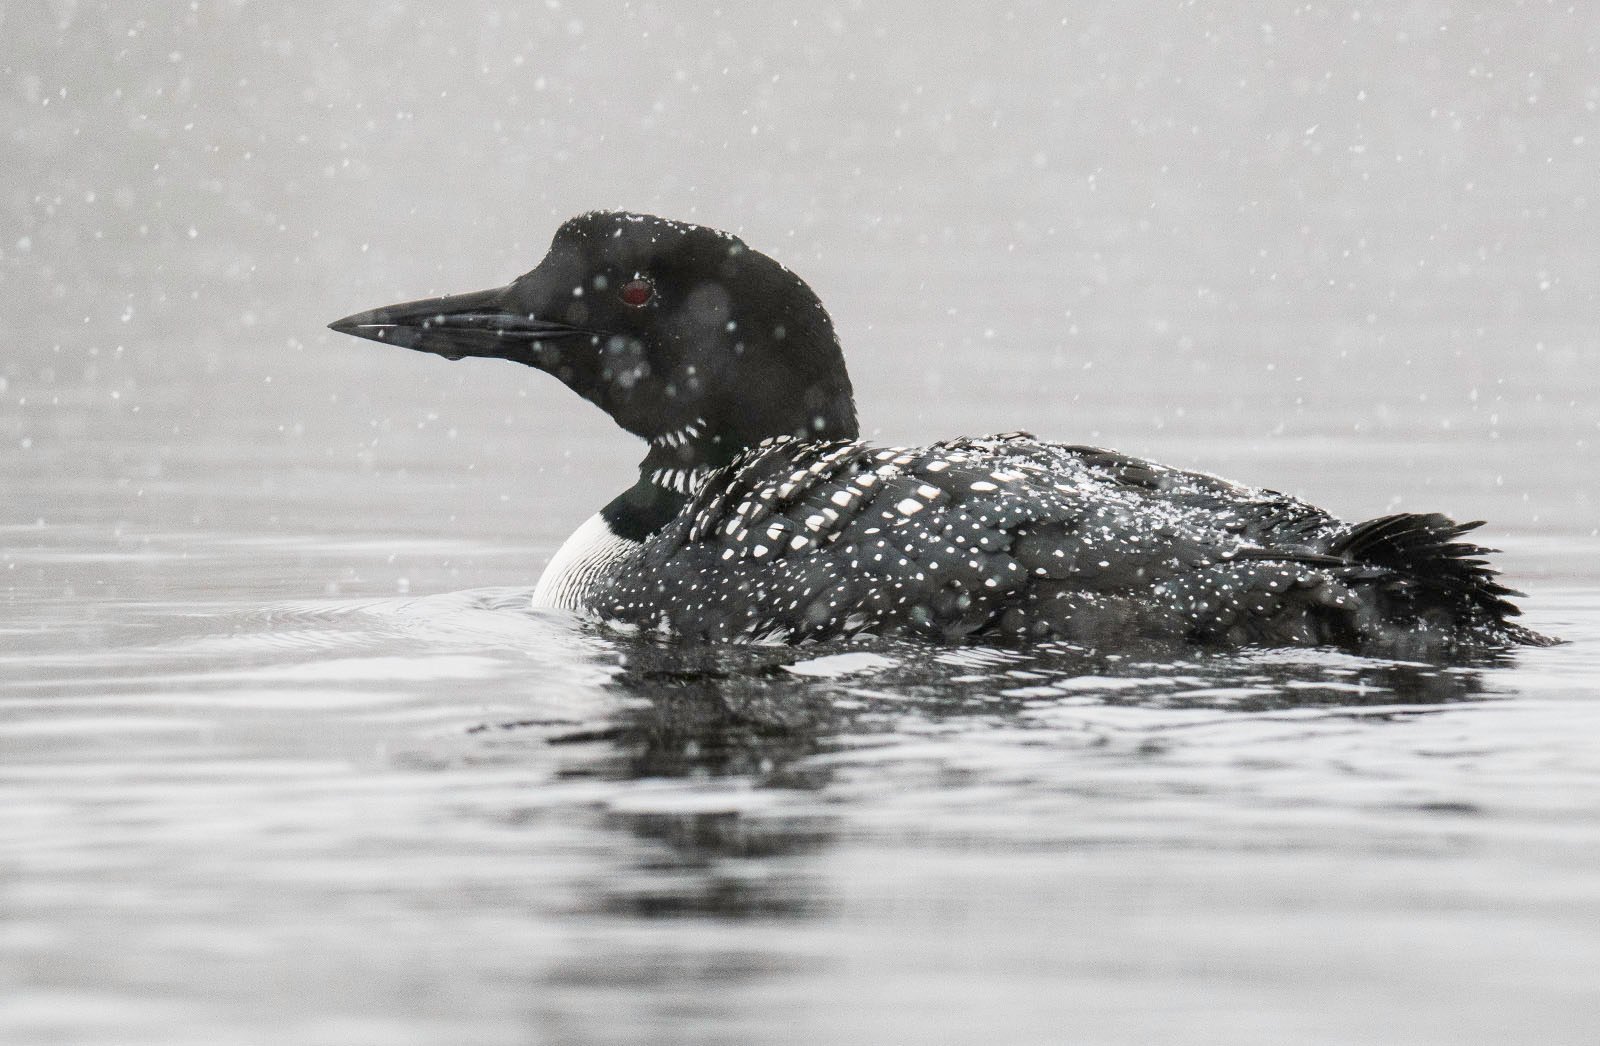 A common loon with striking black and white plumage floats on the tranquil water beneath a gentle snowfall.